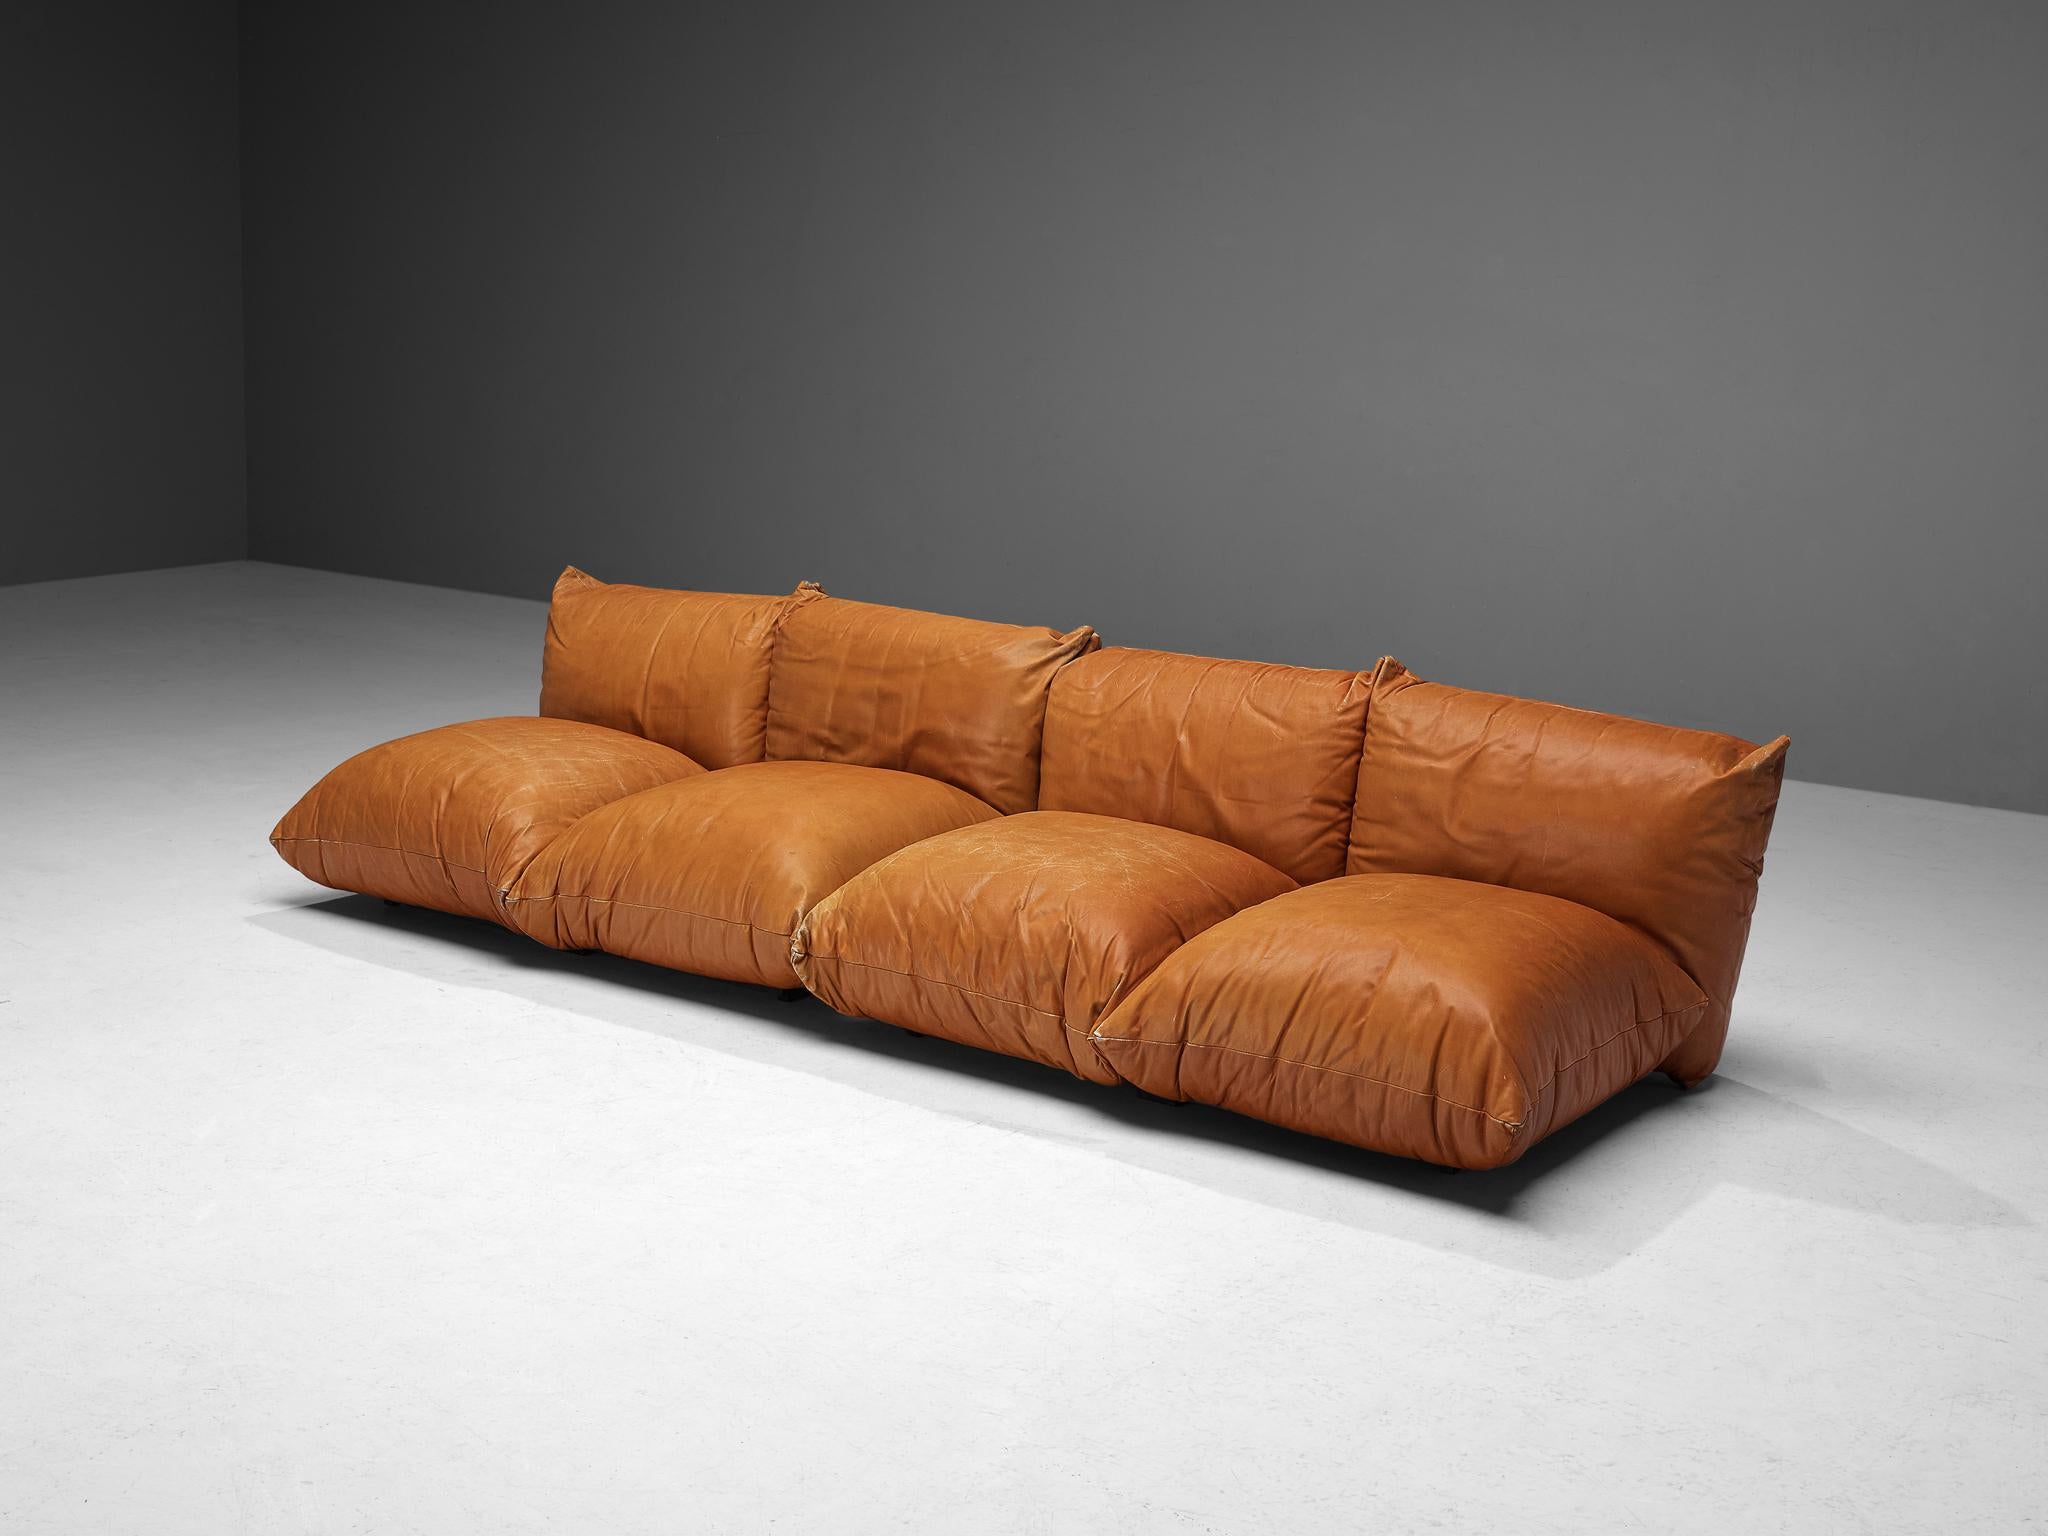 Mario Marenco for Arflex, sectional sofa model 'Marenco', Italy, design 1970 

This luscious and utterly comfortable sectional sofa is designed by the Italian designer Mario Marenco in 1970. The large sofa consists of two separate two-seater sofas